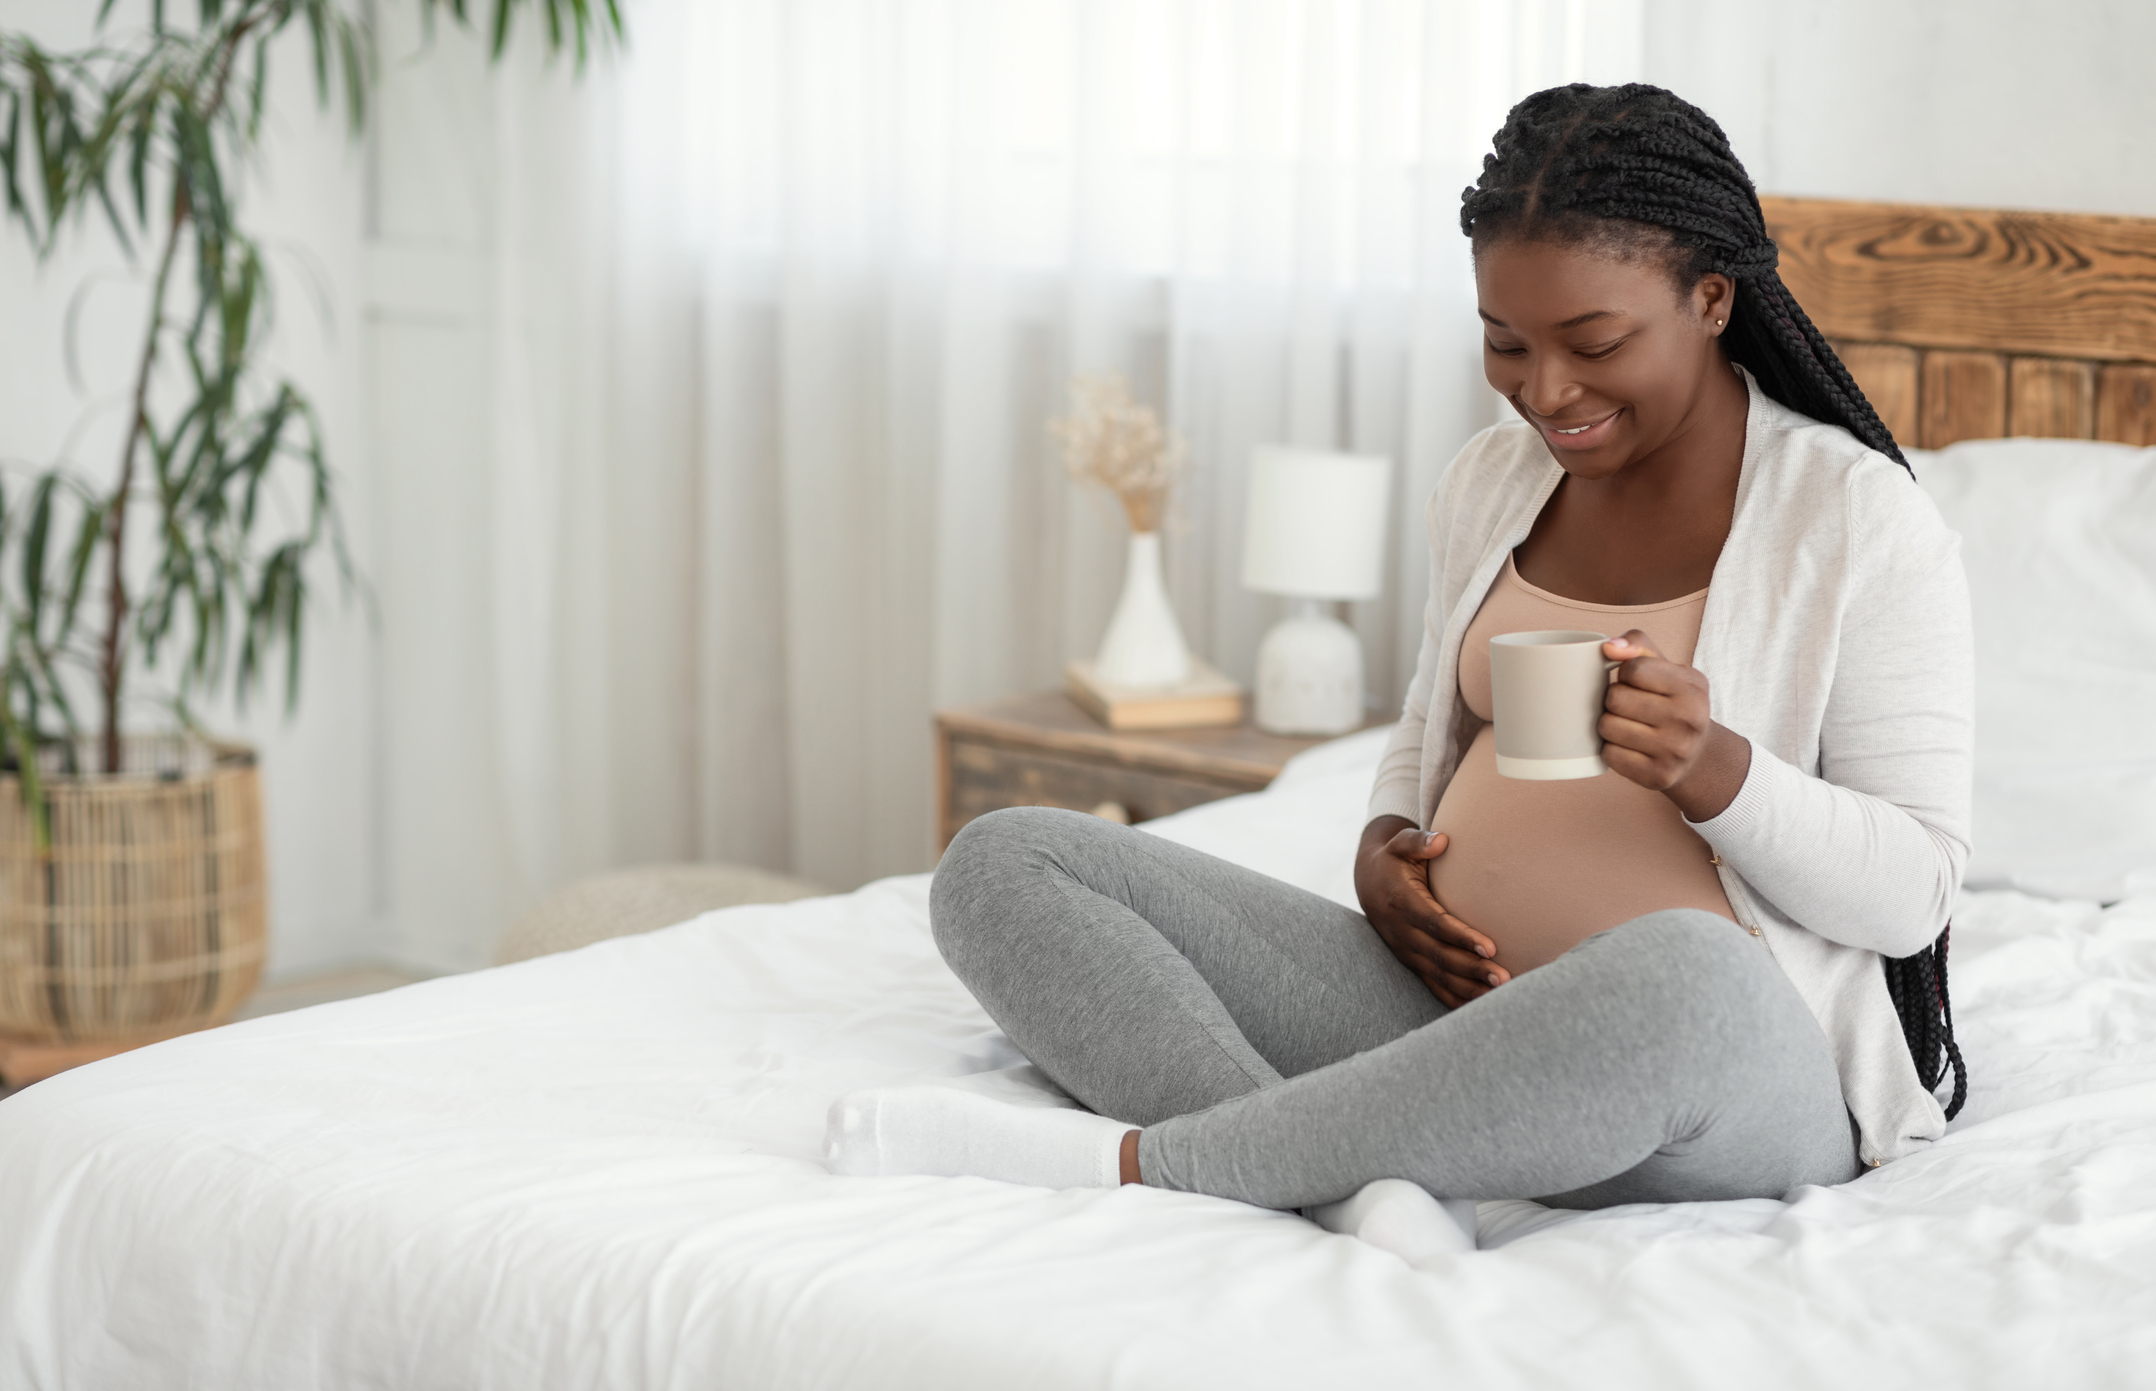 These Herbs Can Make You Pregnant in Weeks: The Incredible Testimonies of Two Women Who Tried Them